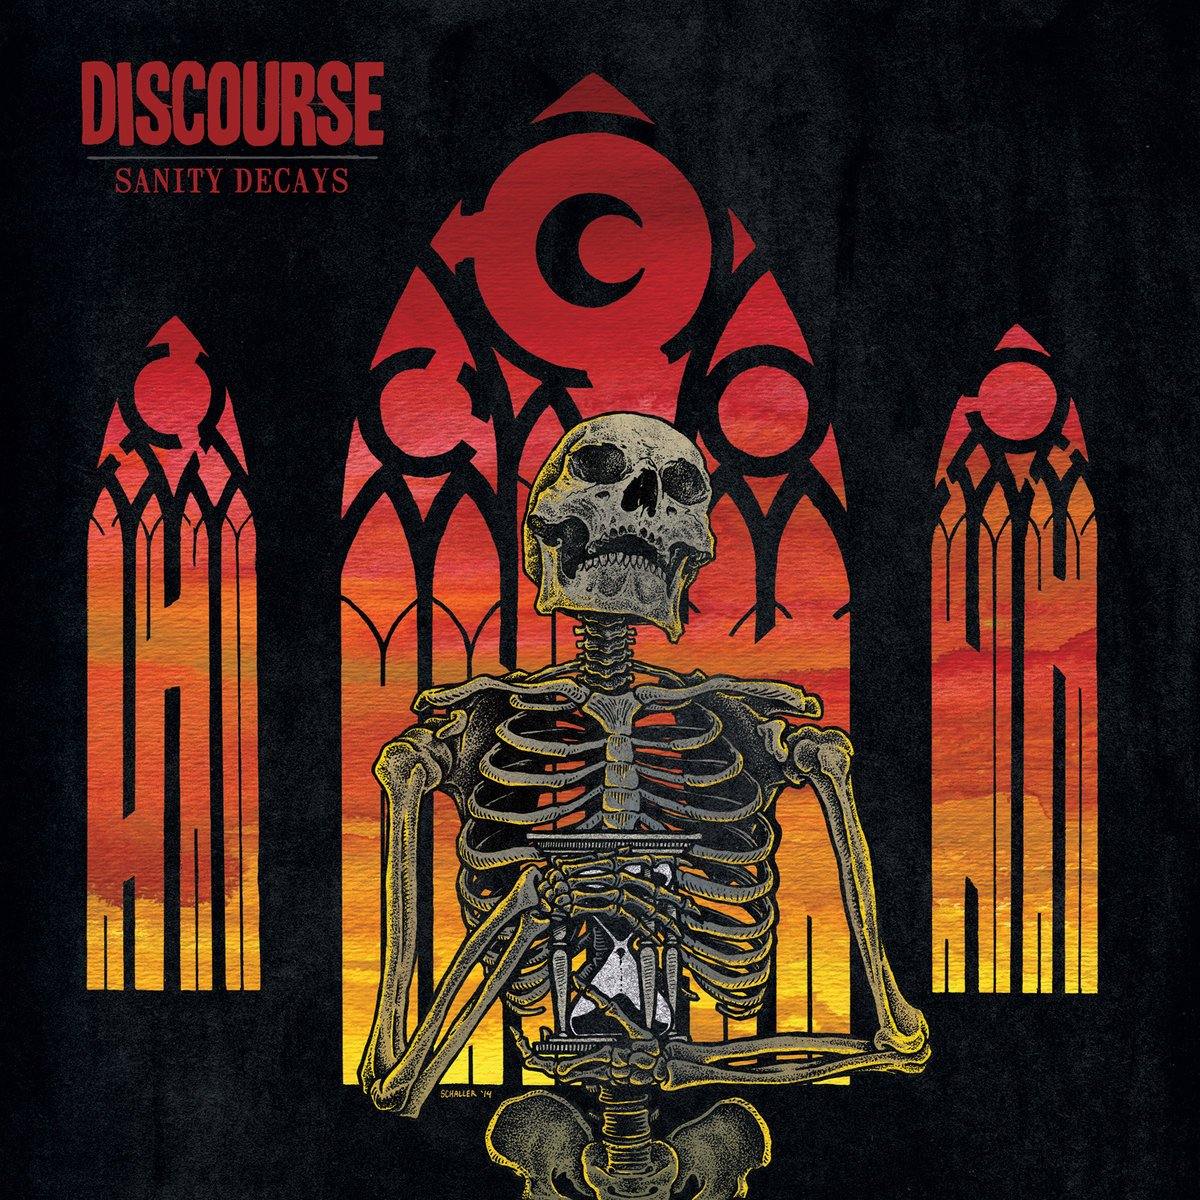 Buy – Discourse "Sanity Decays" 12" – Band & Music Merch – Cold Cuts Merch